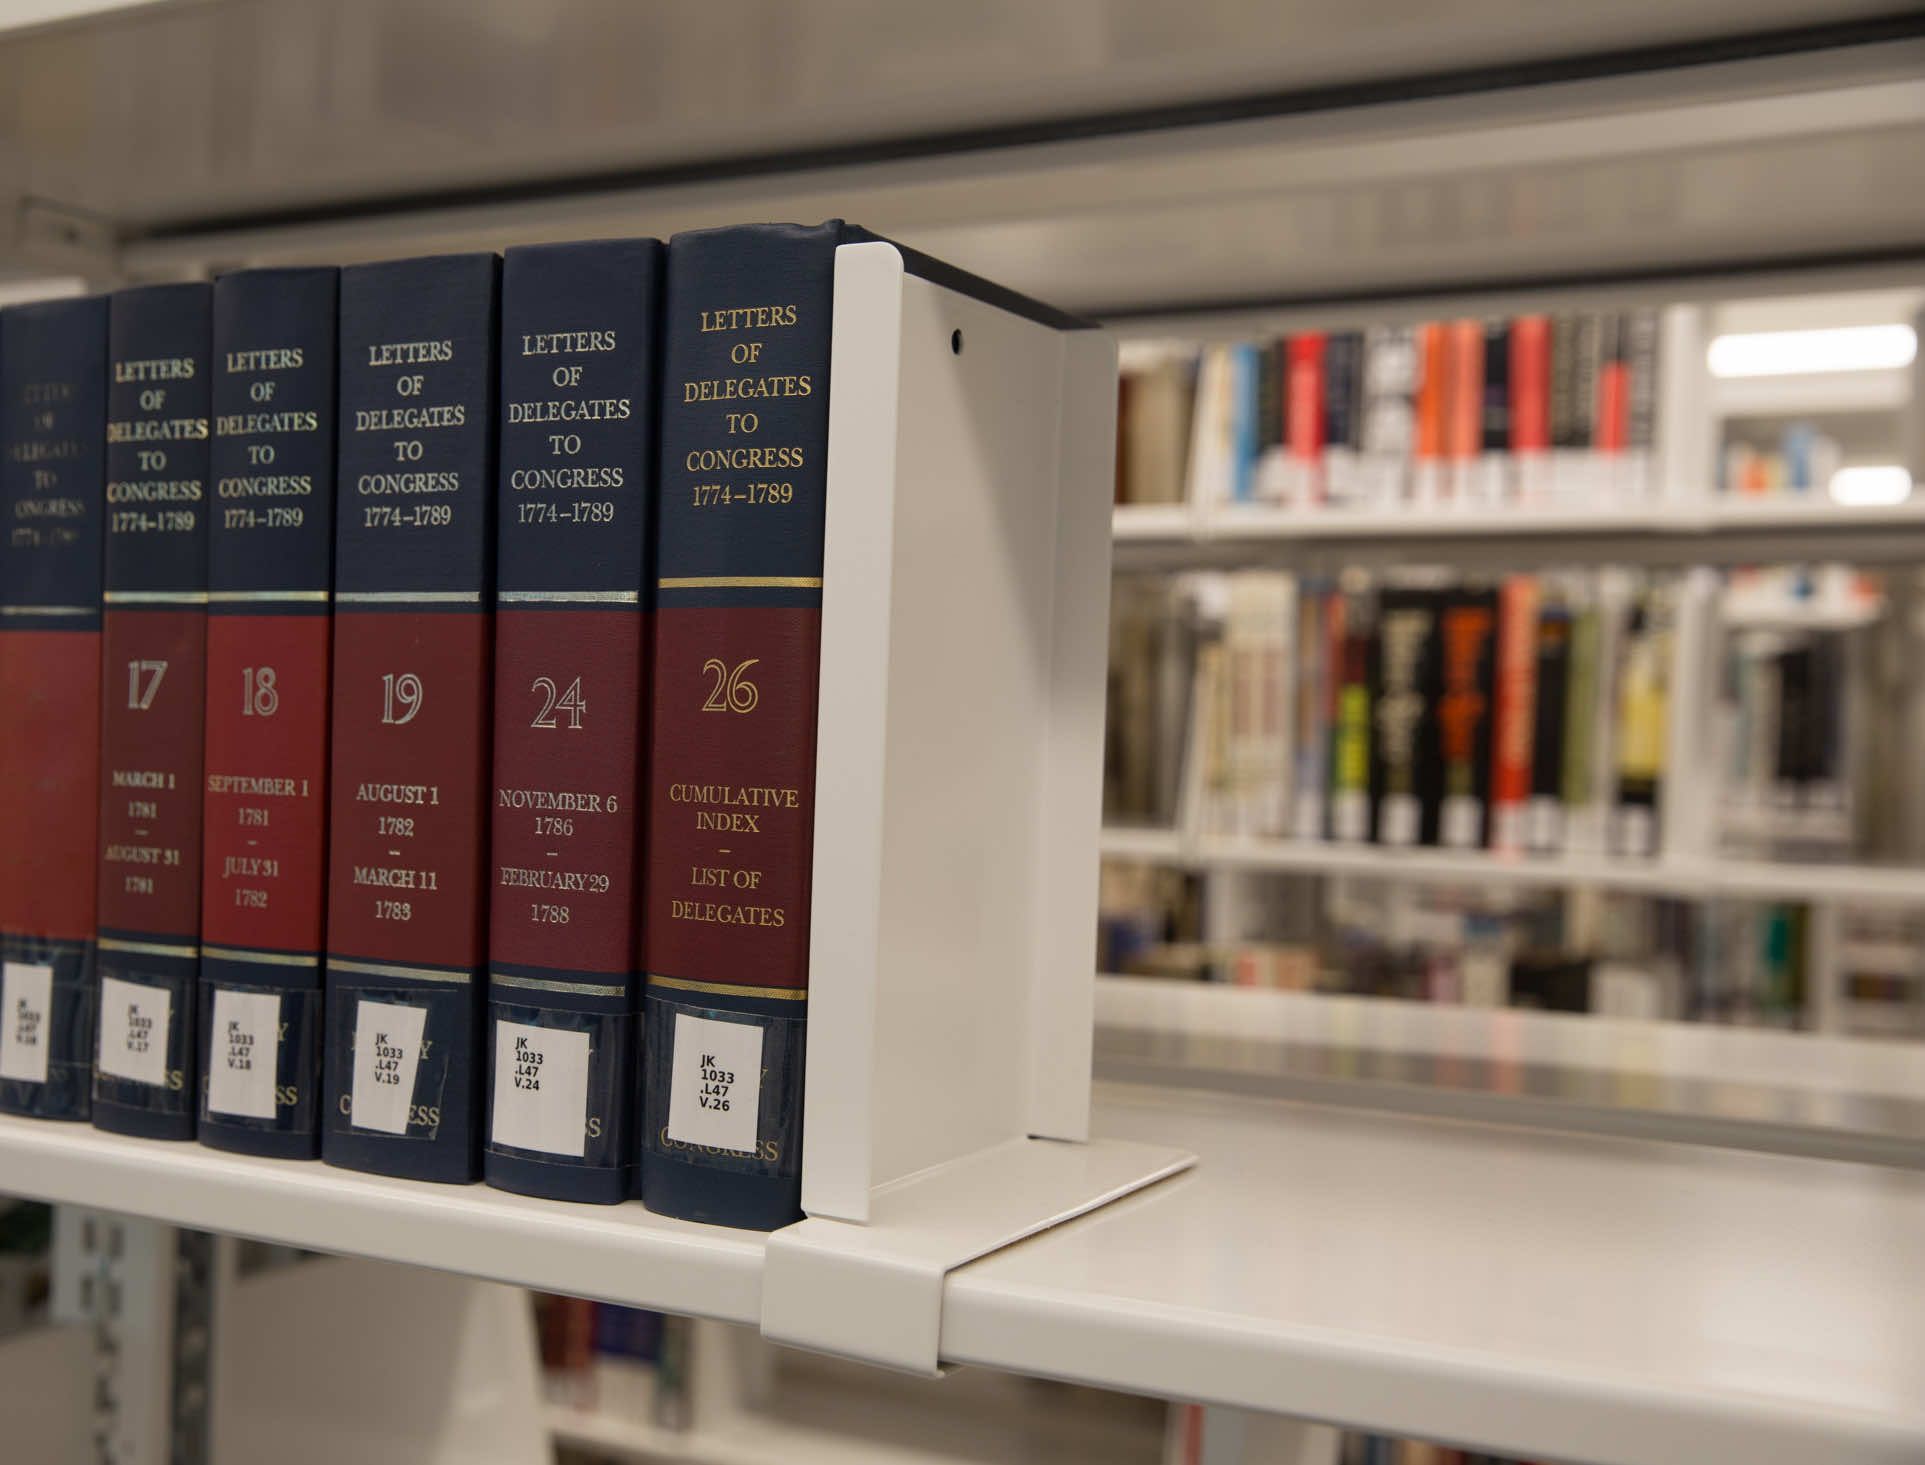 Law books on Spacesaver shelving system